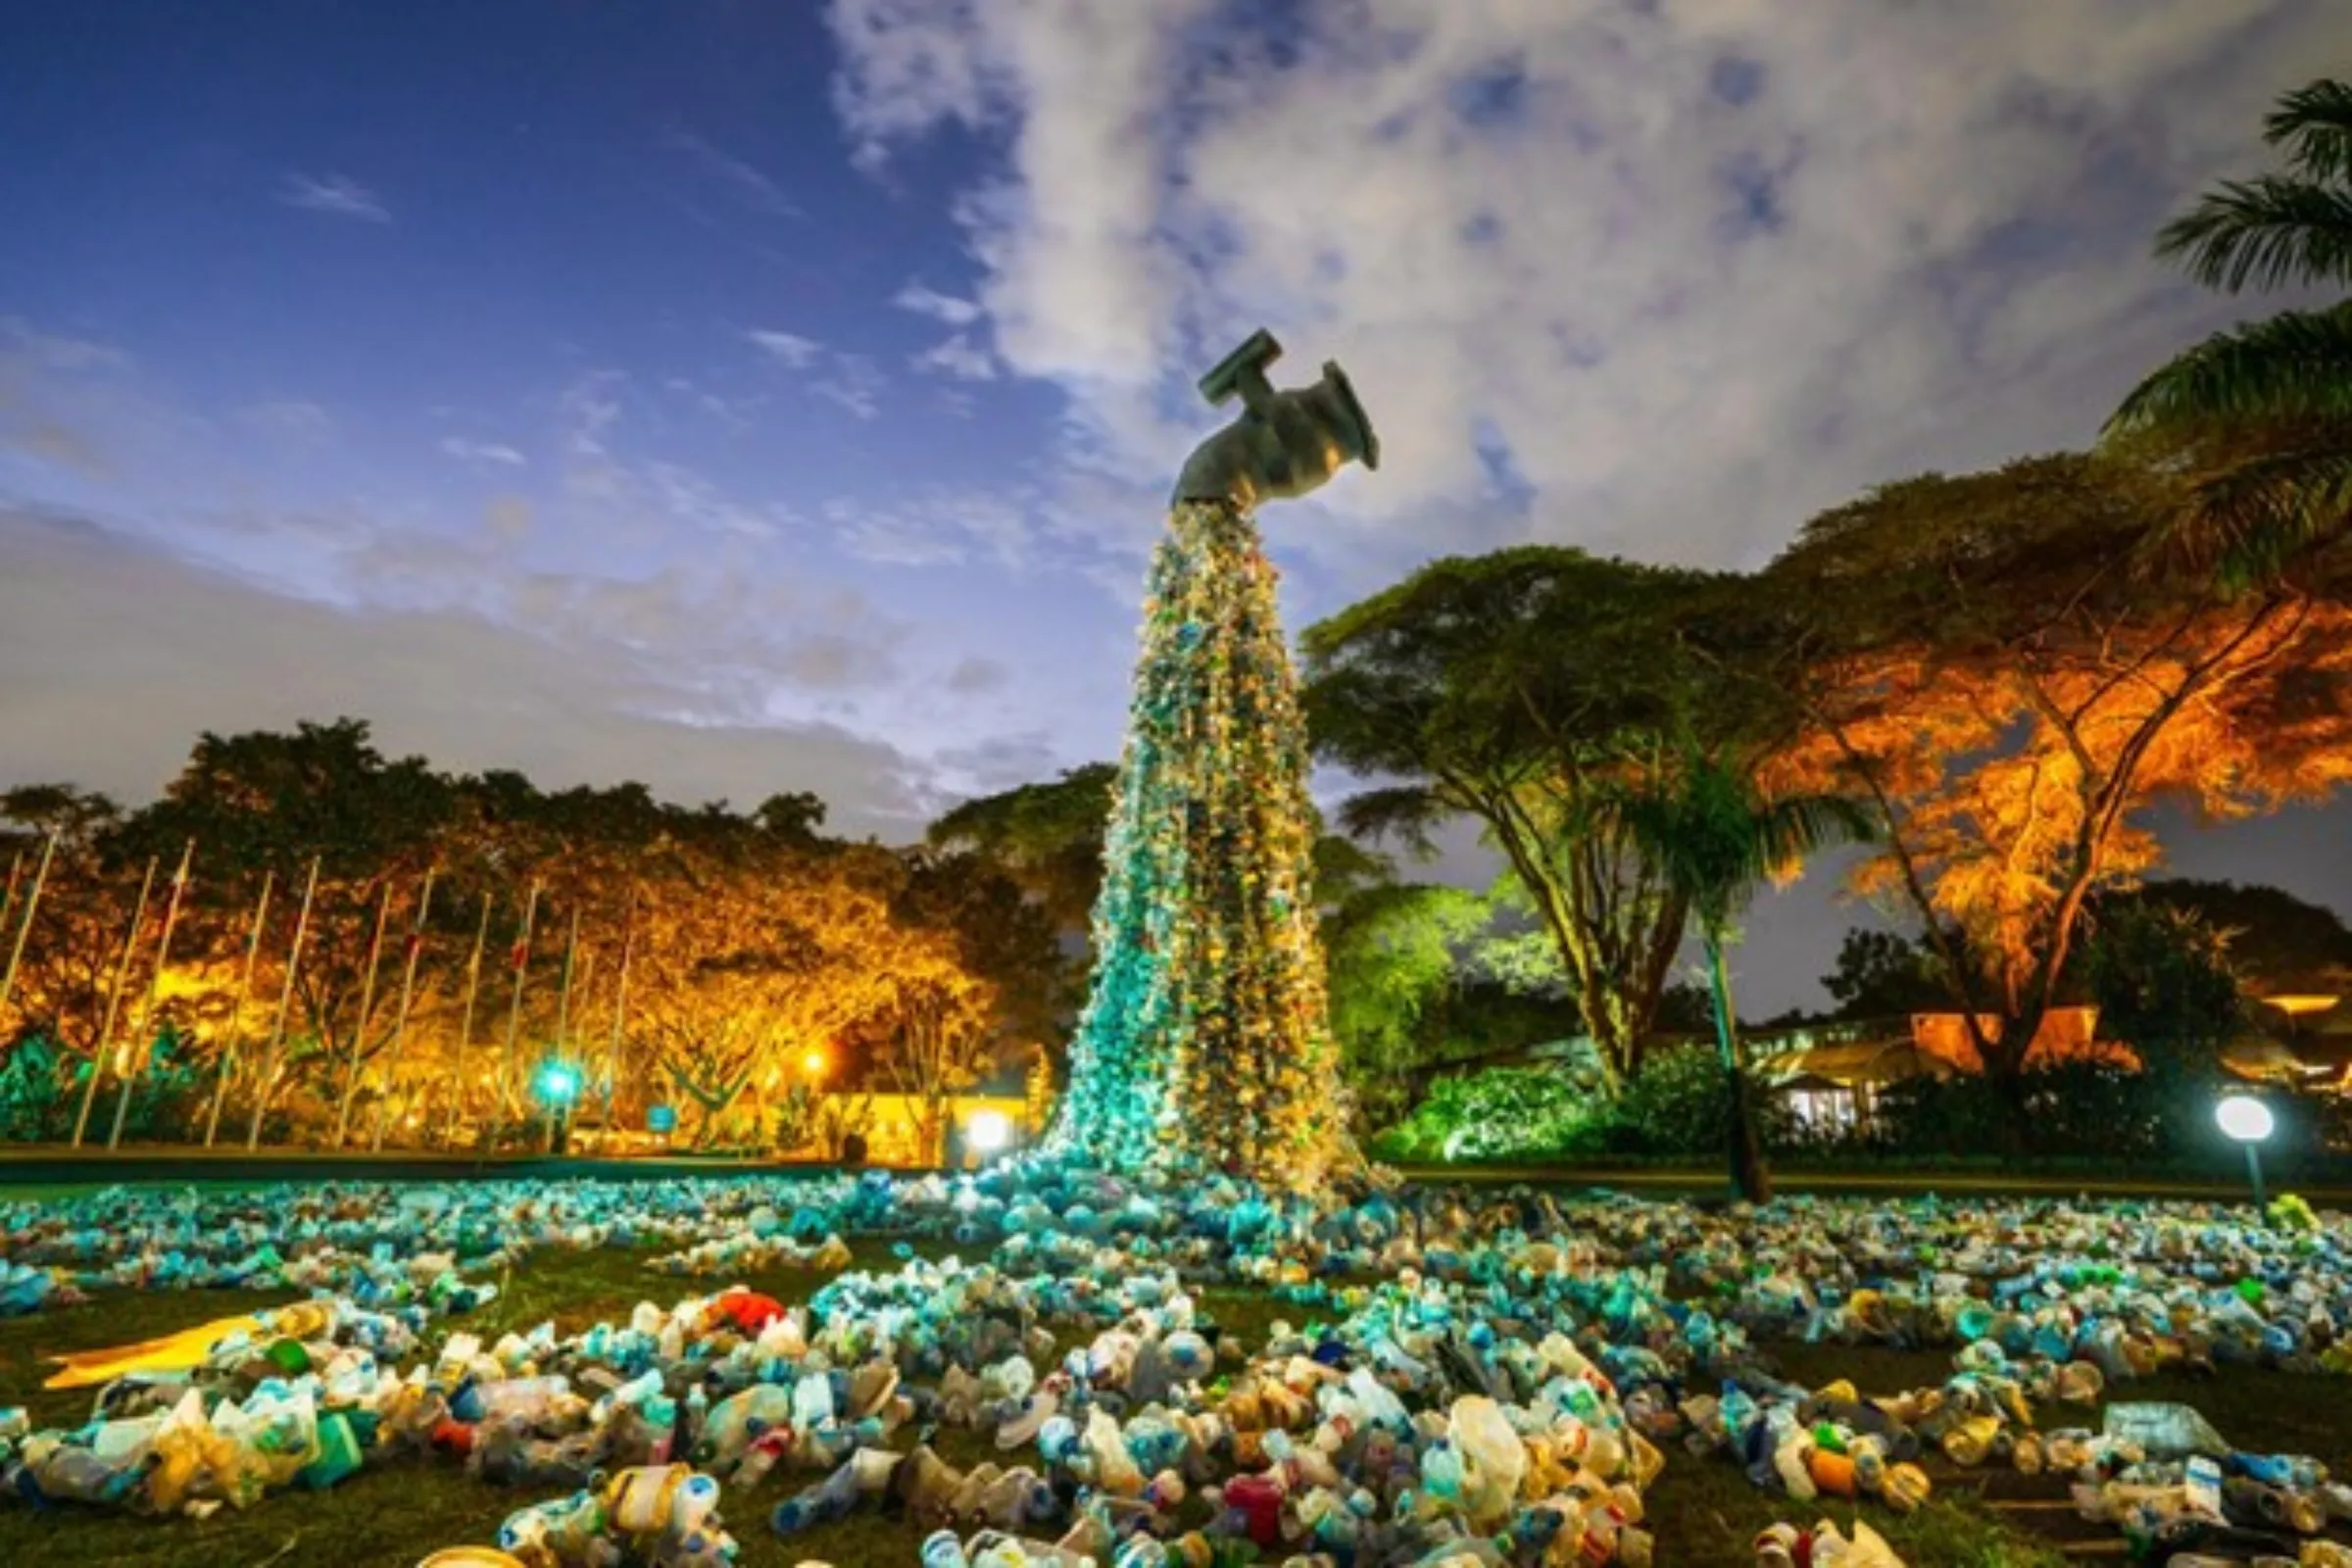 A tap made of plastic waste by artist Benjamin Von Wong to highlight the damage from single-use plastics is shown with a backdrop of trees and clouds at the United Nations compound in Nairobi, Kenya. Handout picture via Thomson Reuters Foundation/Benjamin Von Wong